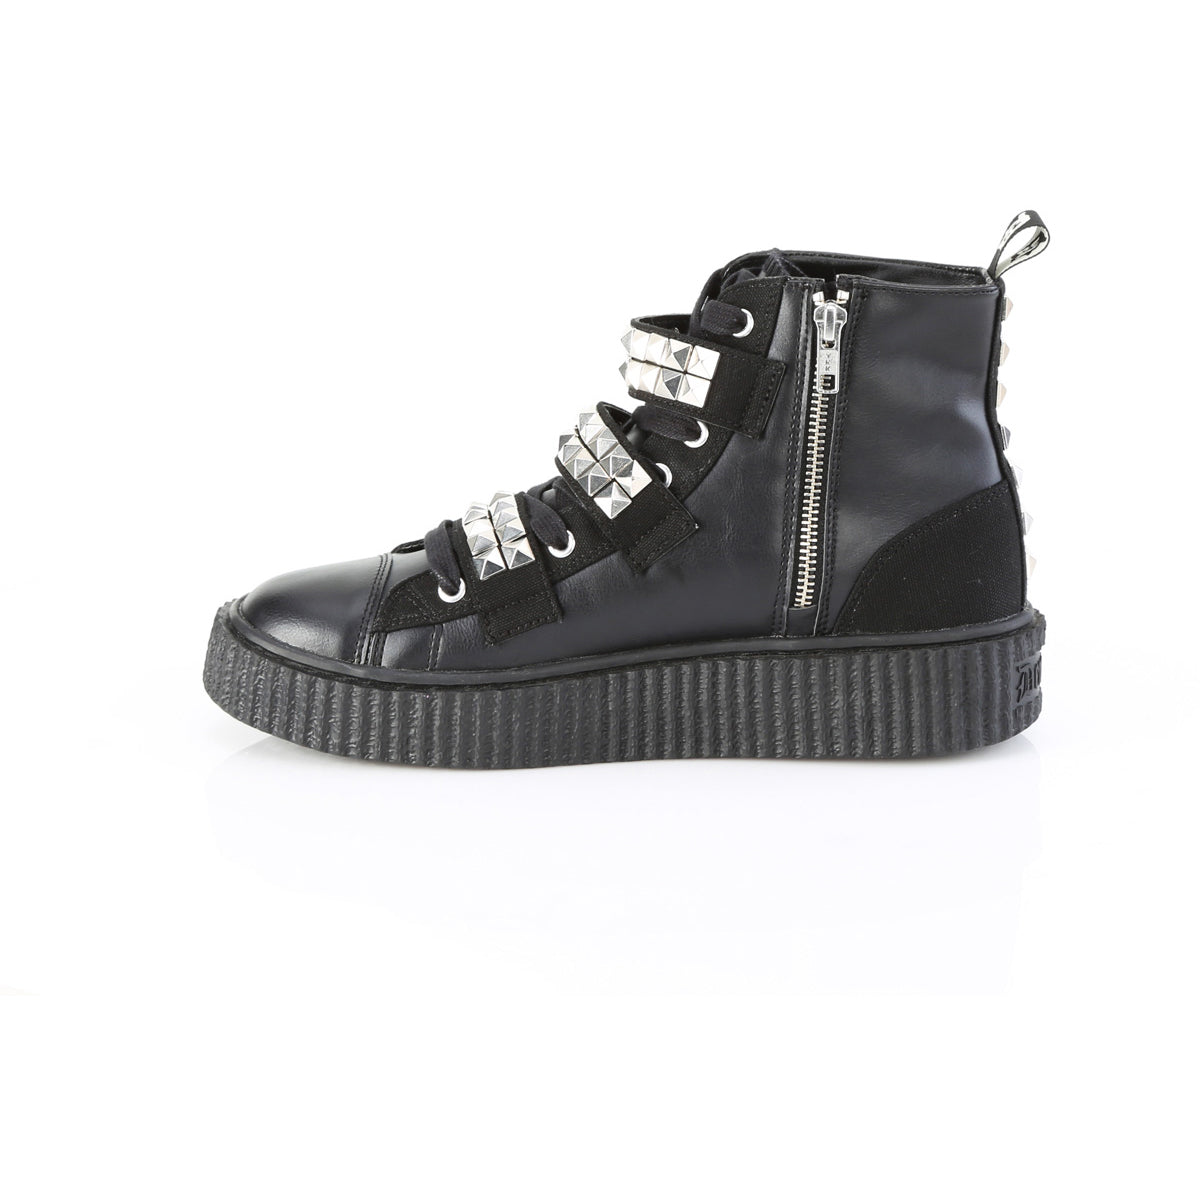 1 1/2"Pf Round Toe Lace-Up Front High Top Creeper Sneaker Pleaser Demonia SNEEKER/225